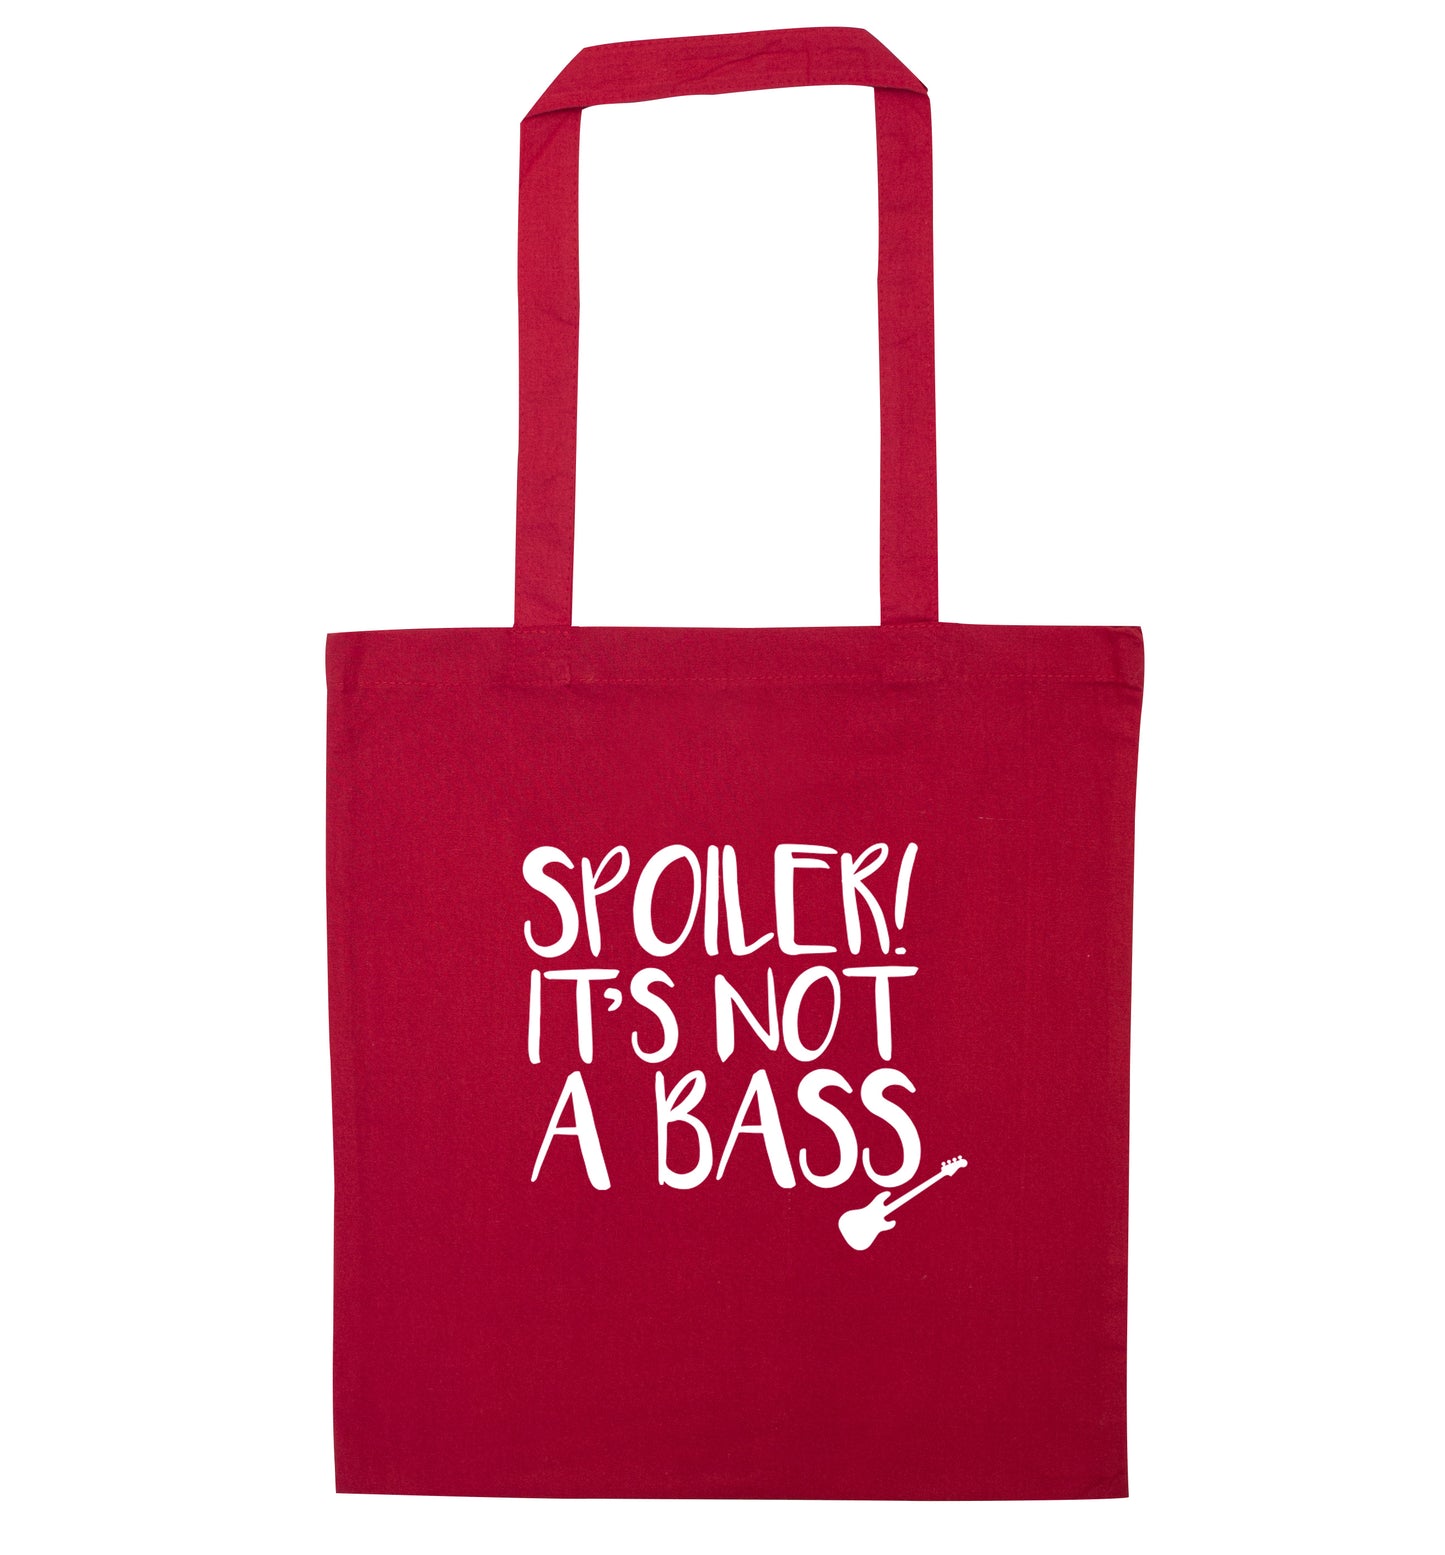 Spoiler it's not a bass red tote bag